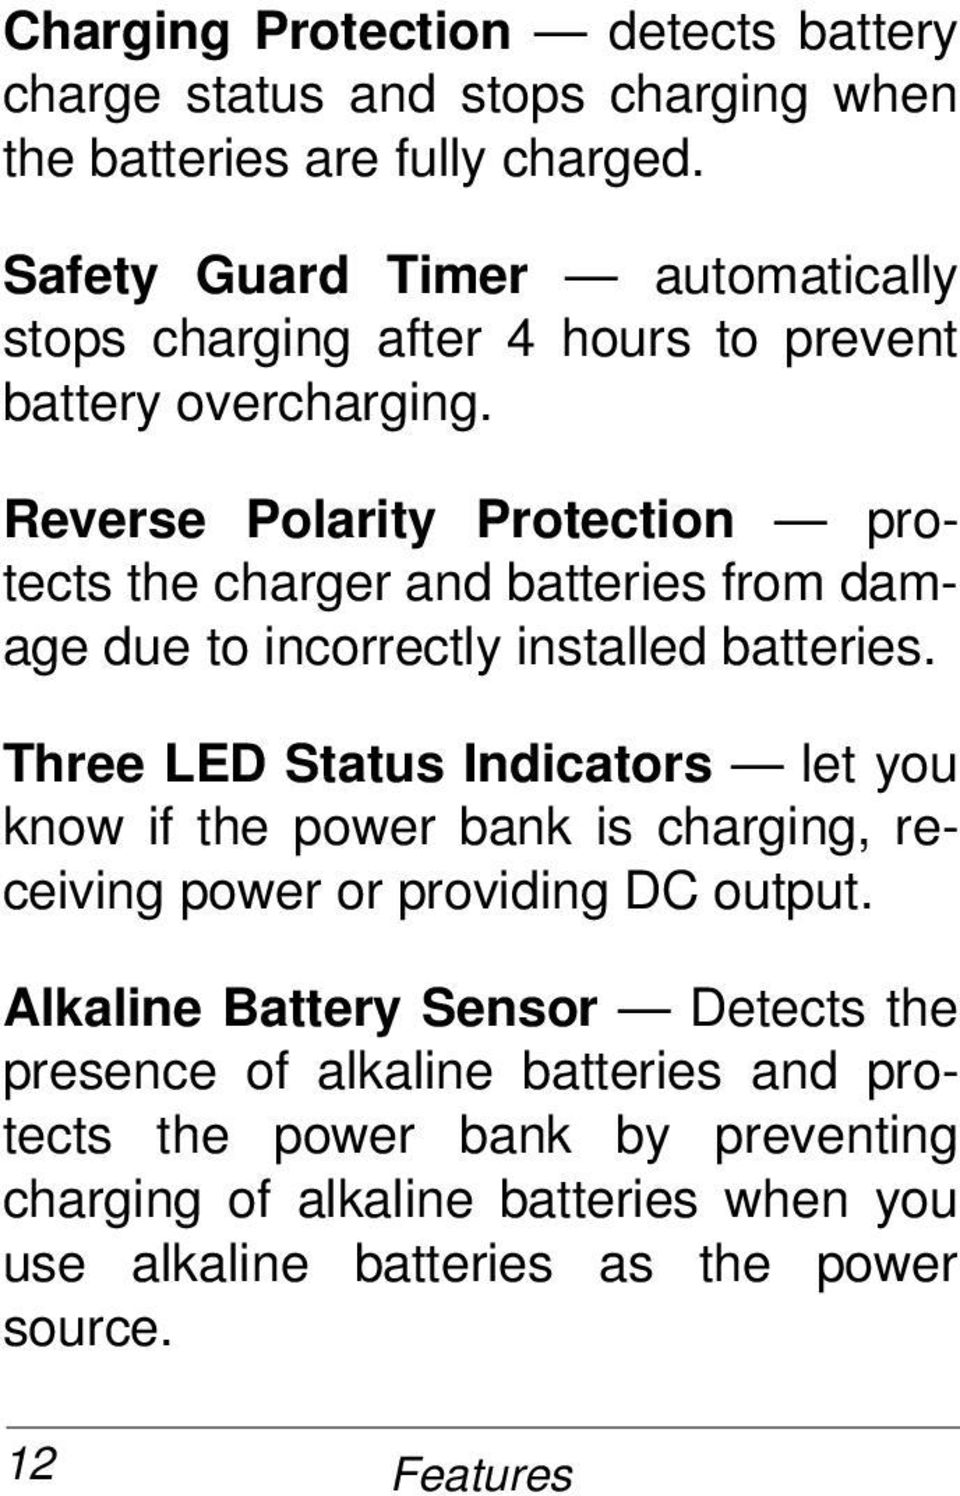 Reverse Polarity Protection protects the charger and batteries from damage due to incorrectly installed batteries.